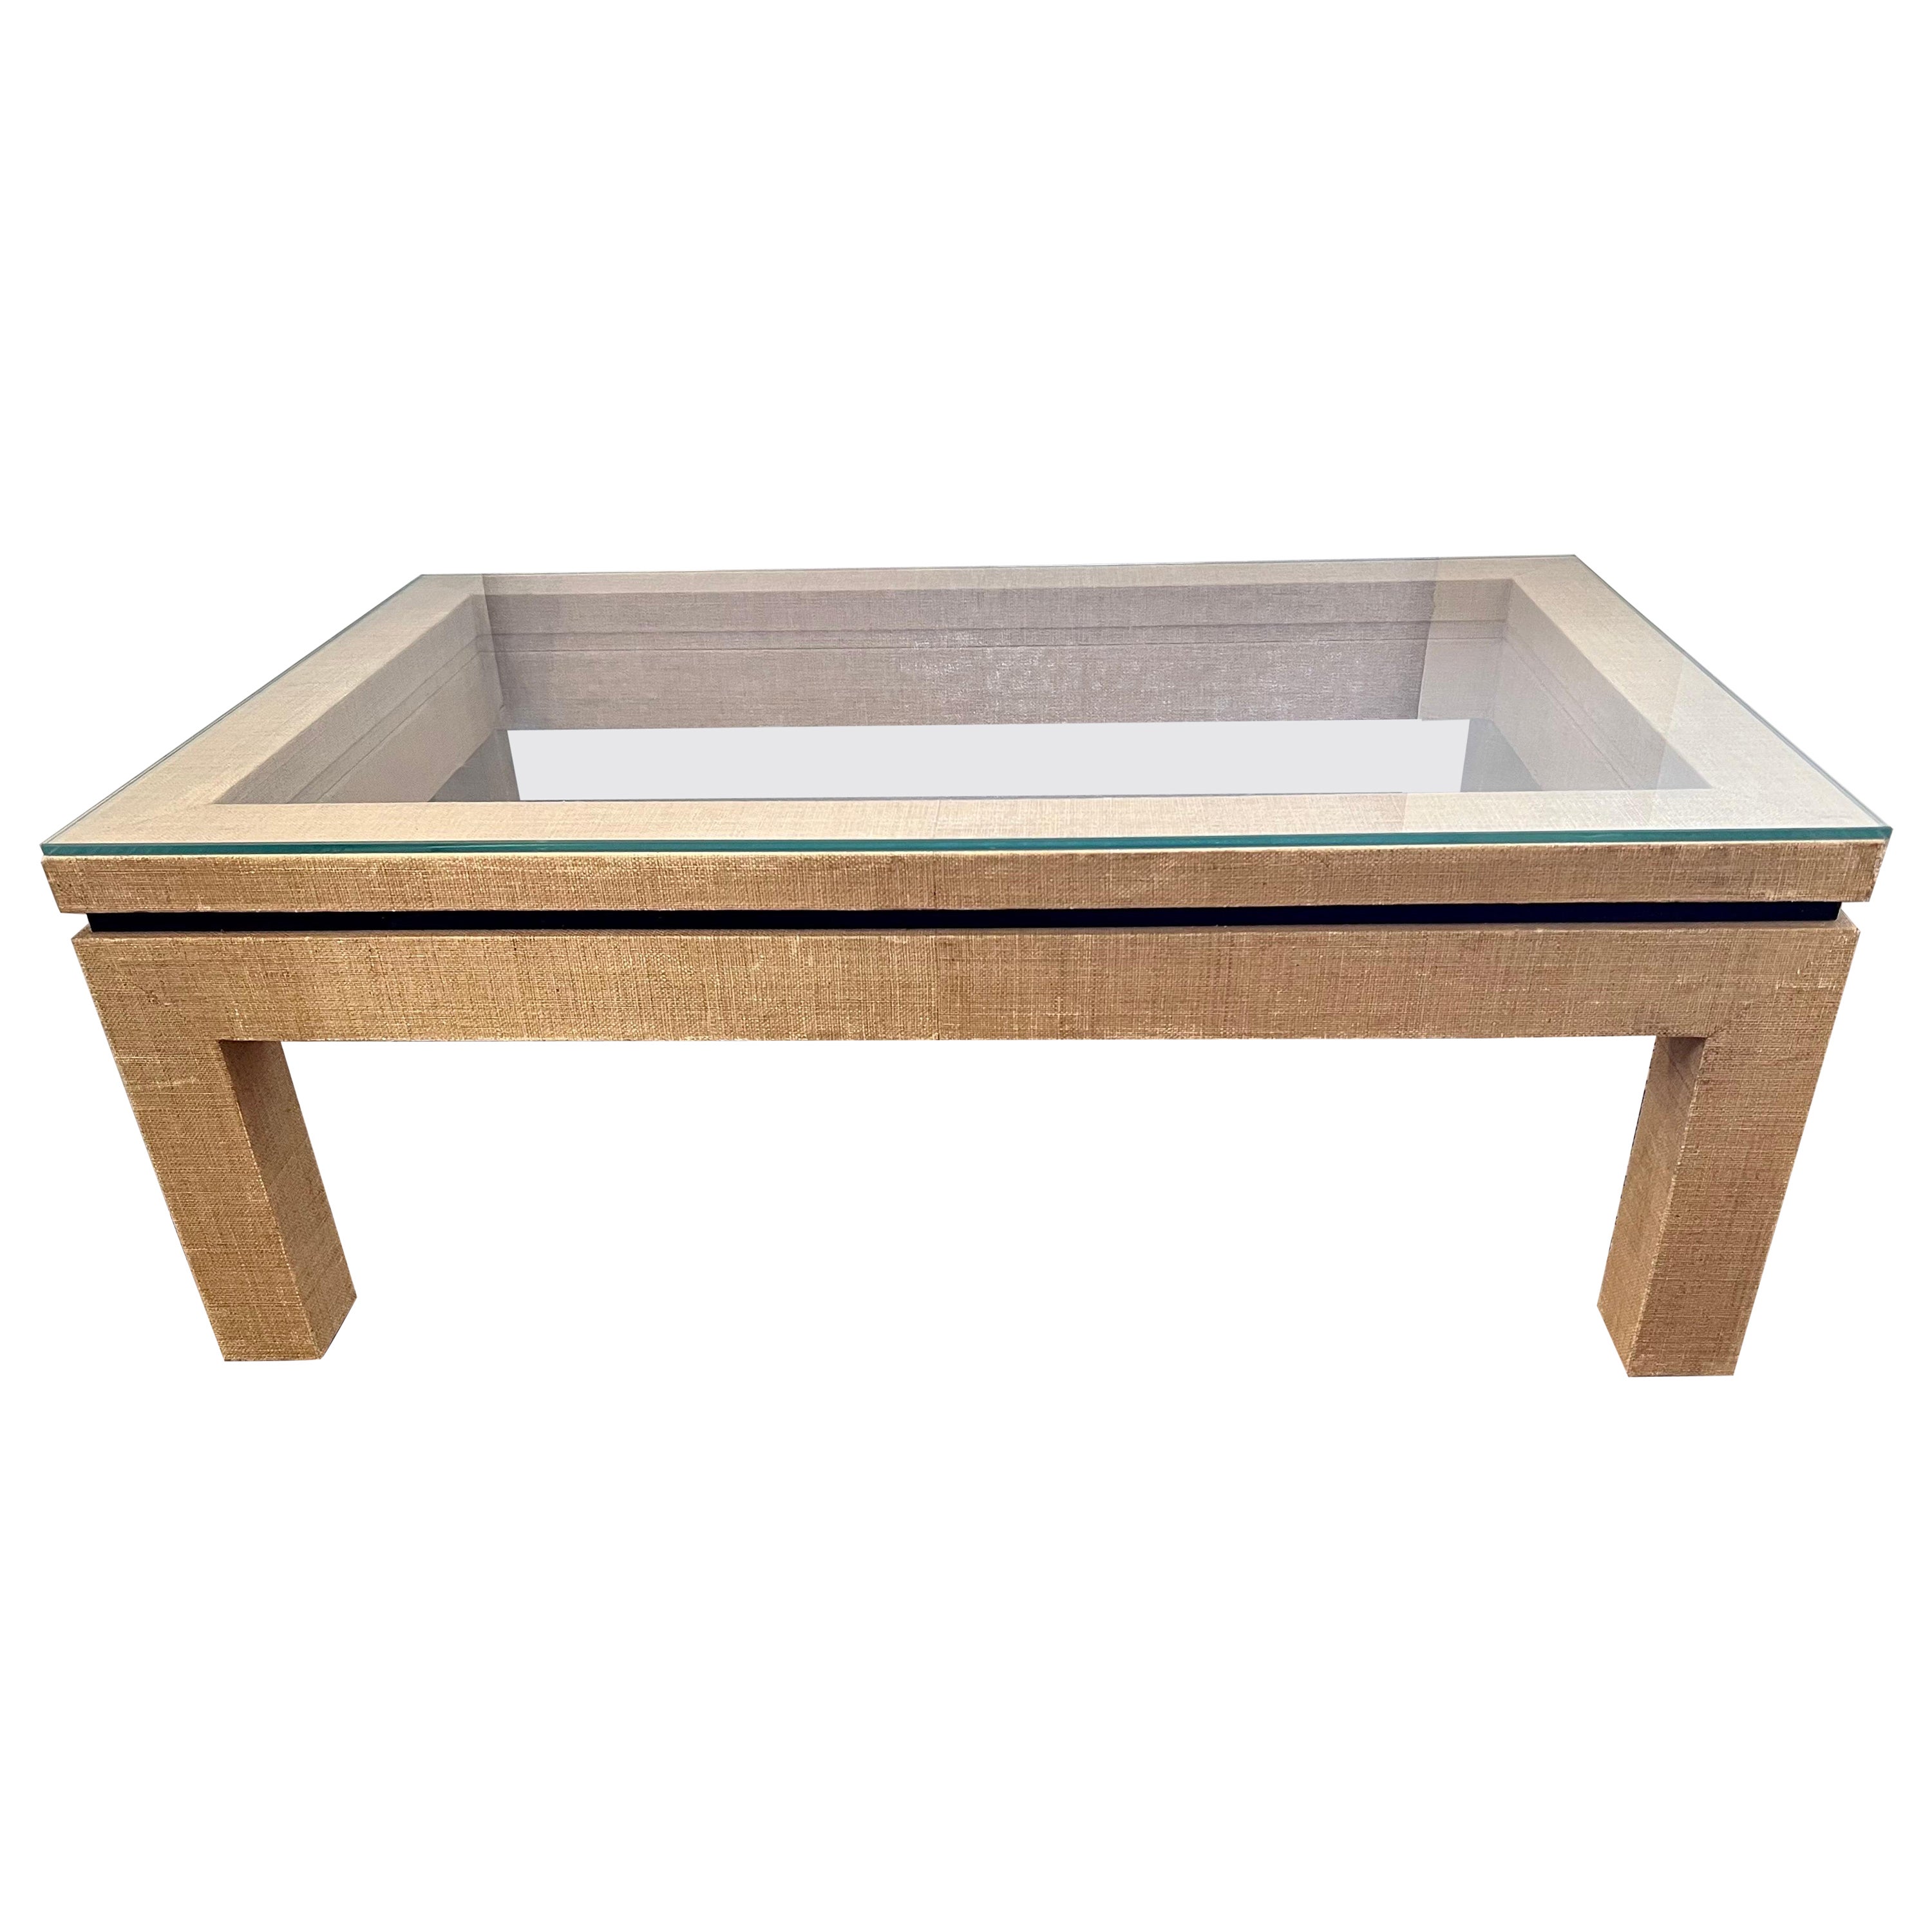 Barclay Butera Raffia Covered Glass Top Cocktail Coffee Table For Sale